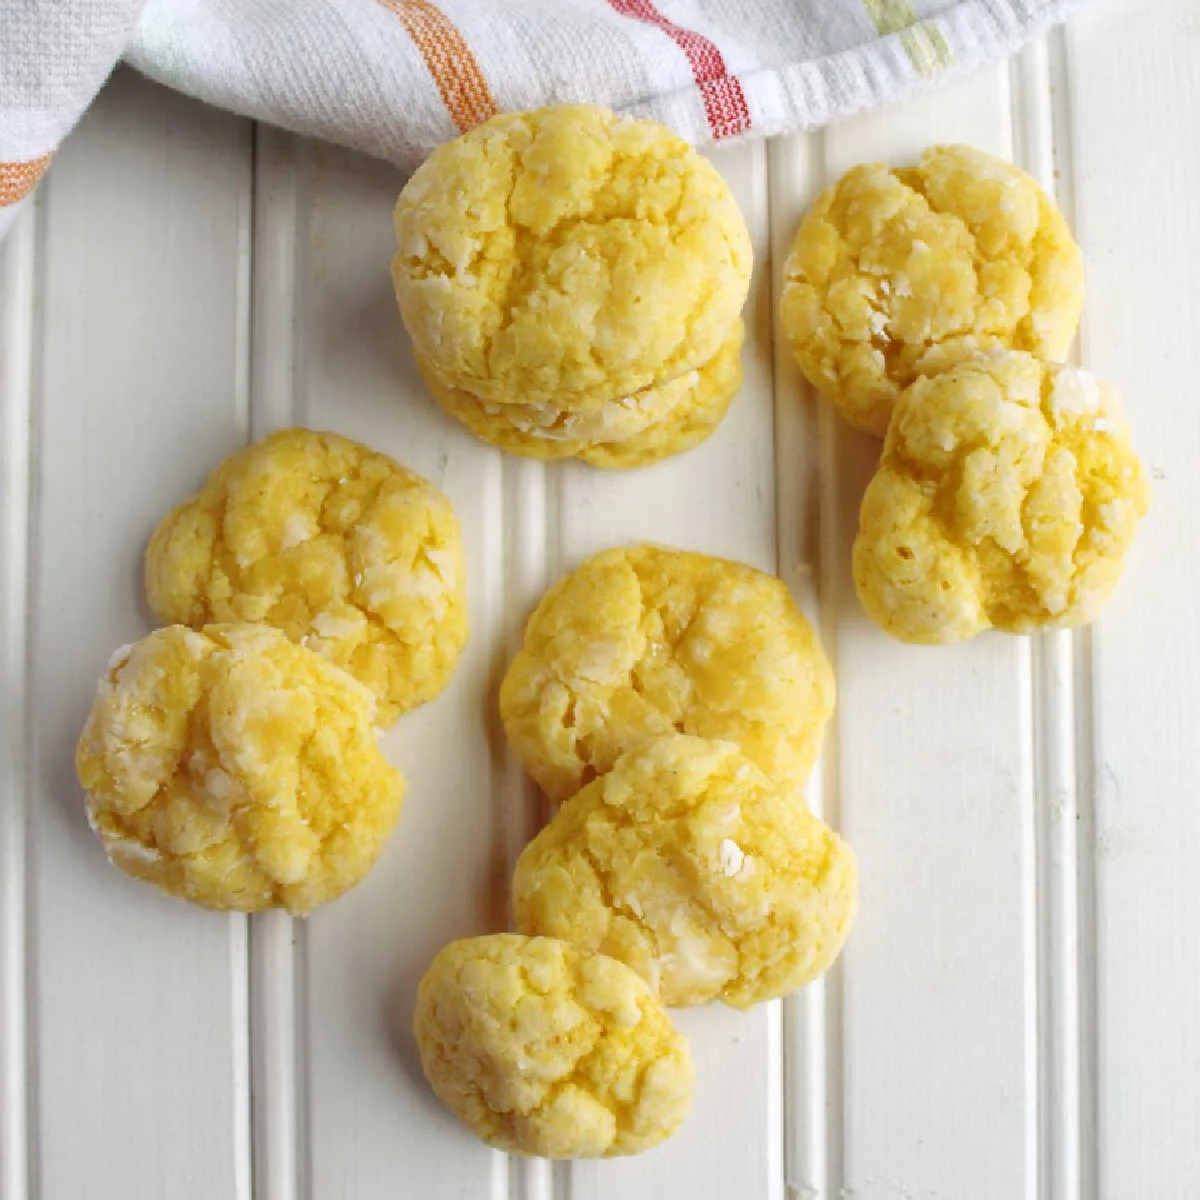 Soft lemon cookies with crackly powdered sugar exterior, ready to eat.